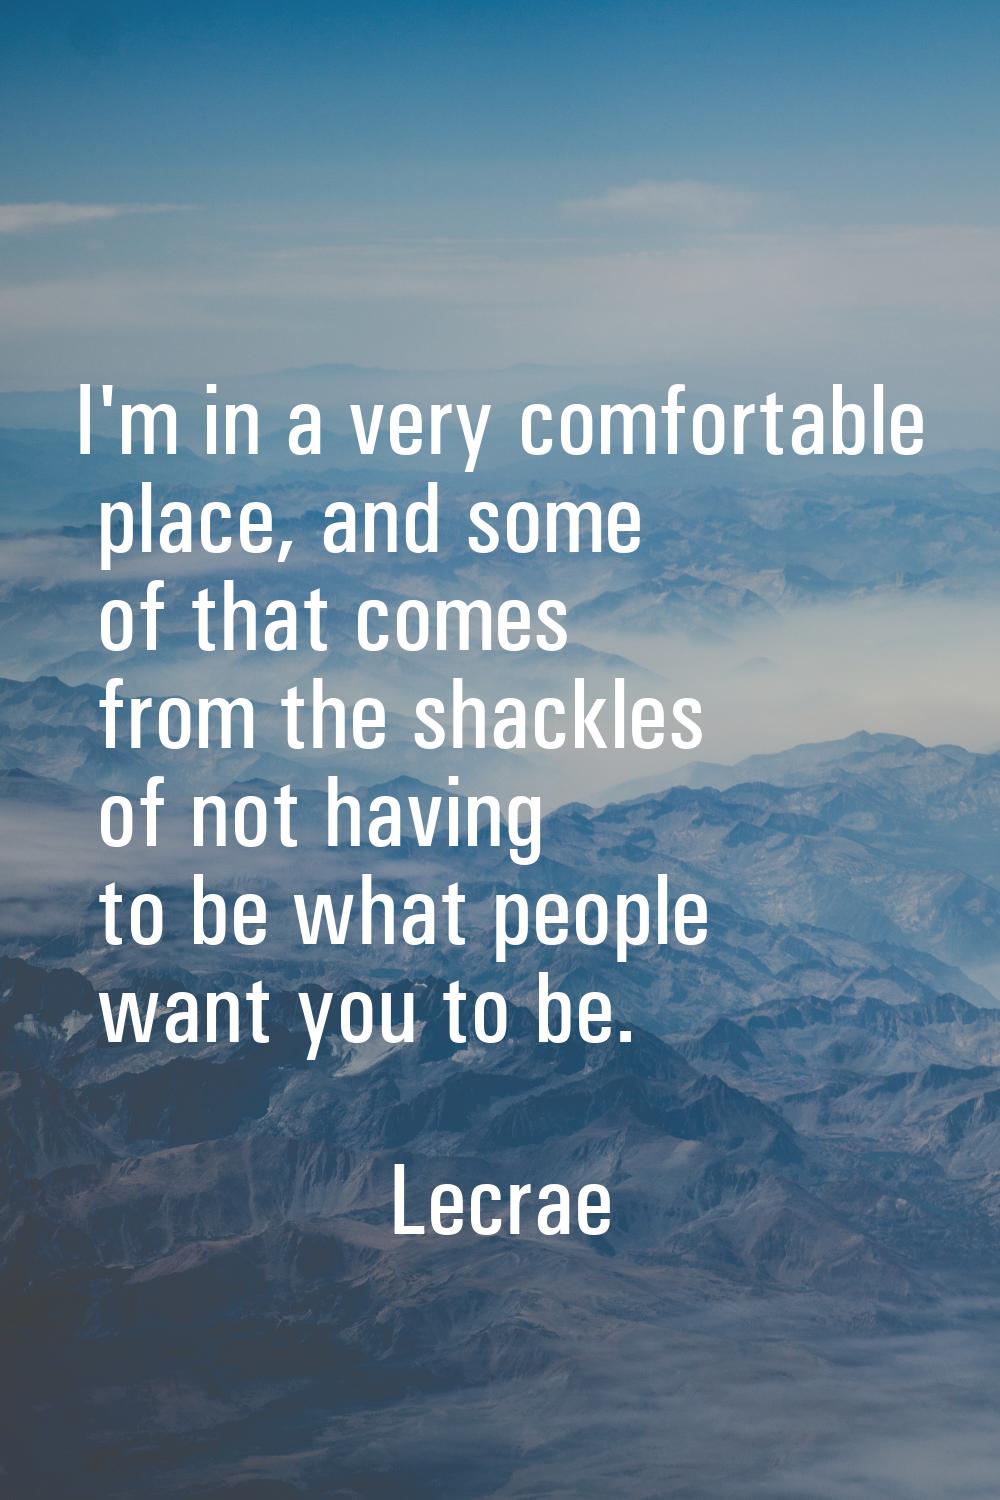 I'm in a very comfortable place, and some of that comes from the shackles of not having to be what 